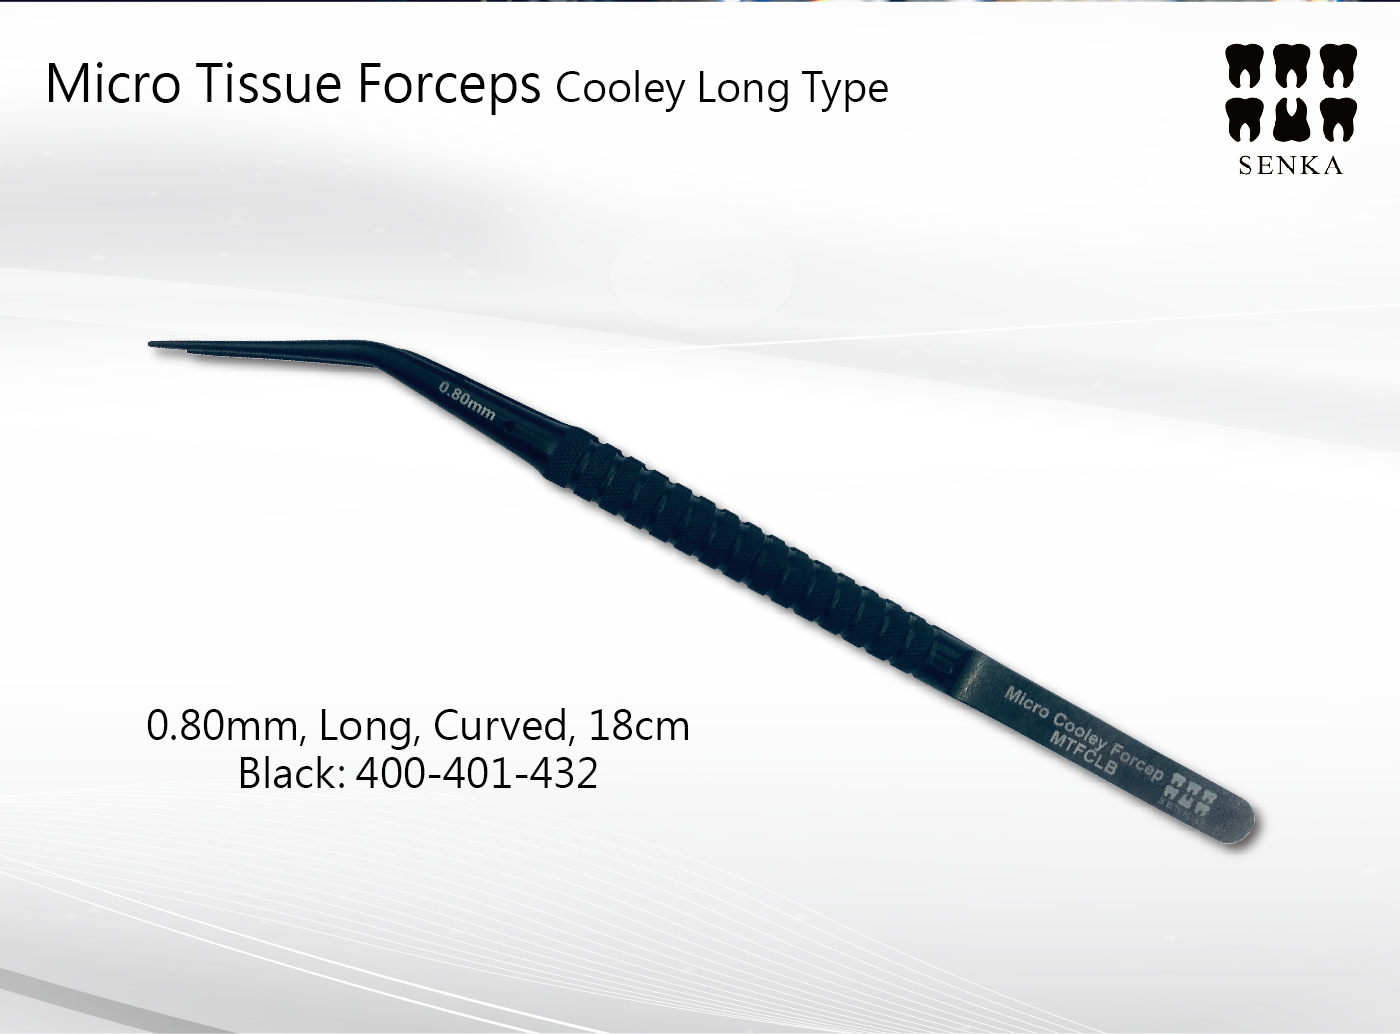 Micro Tissue Forcep Cooley Long content-07.jpg